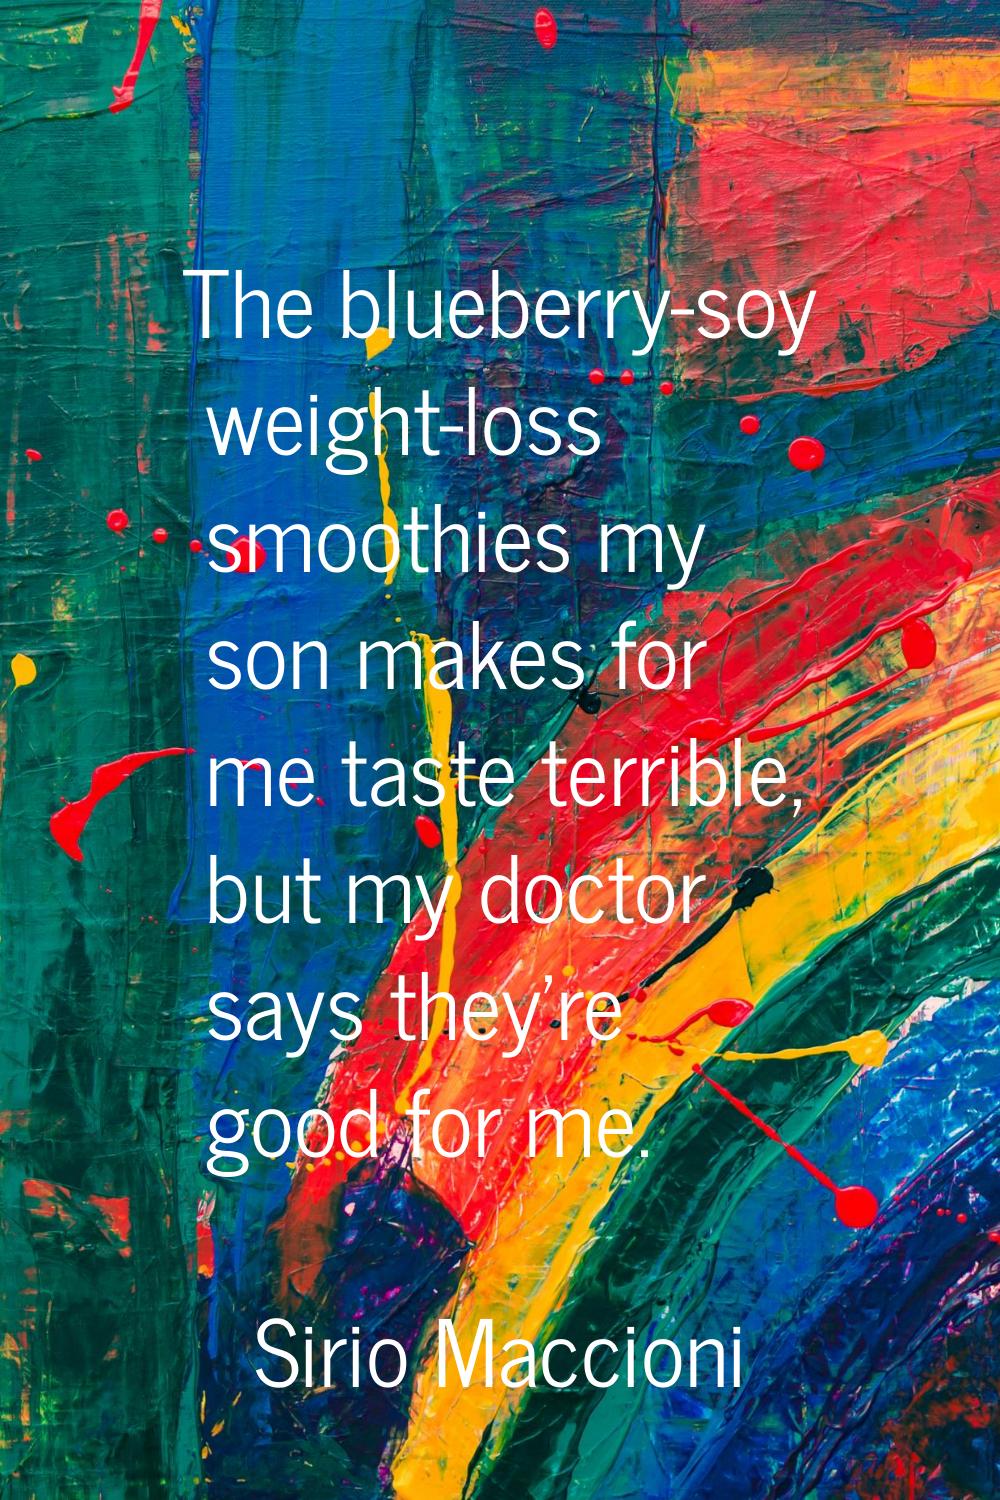 The blueberry-soy weight-loss smoothies my son makes for me taste terrible, but my doctor says they